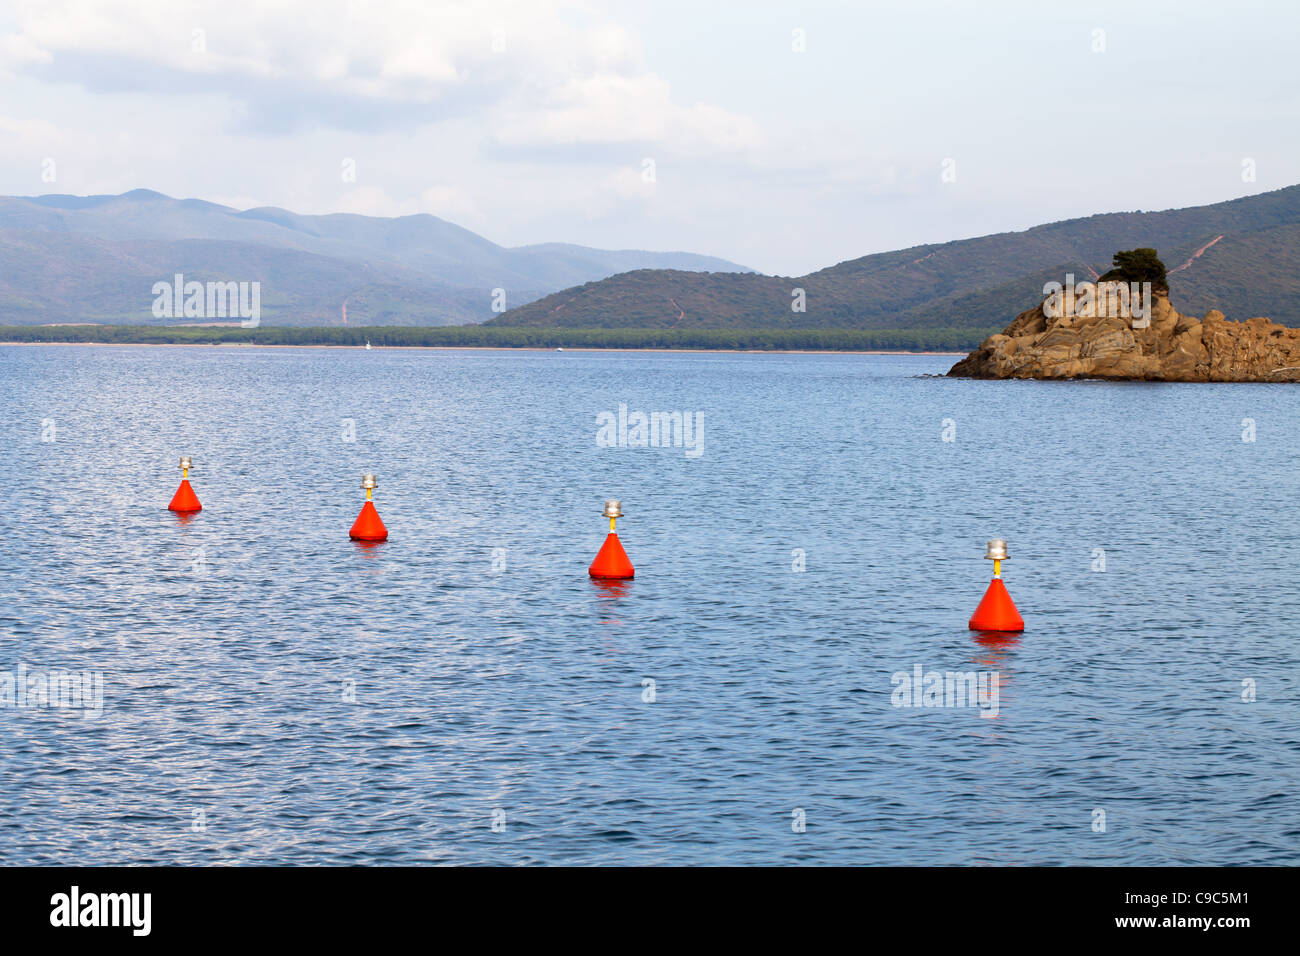 Red buoys in the sea to mark the entrance in the port, Punta Ala, Tuscany, Italy. Stock Photo